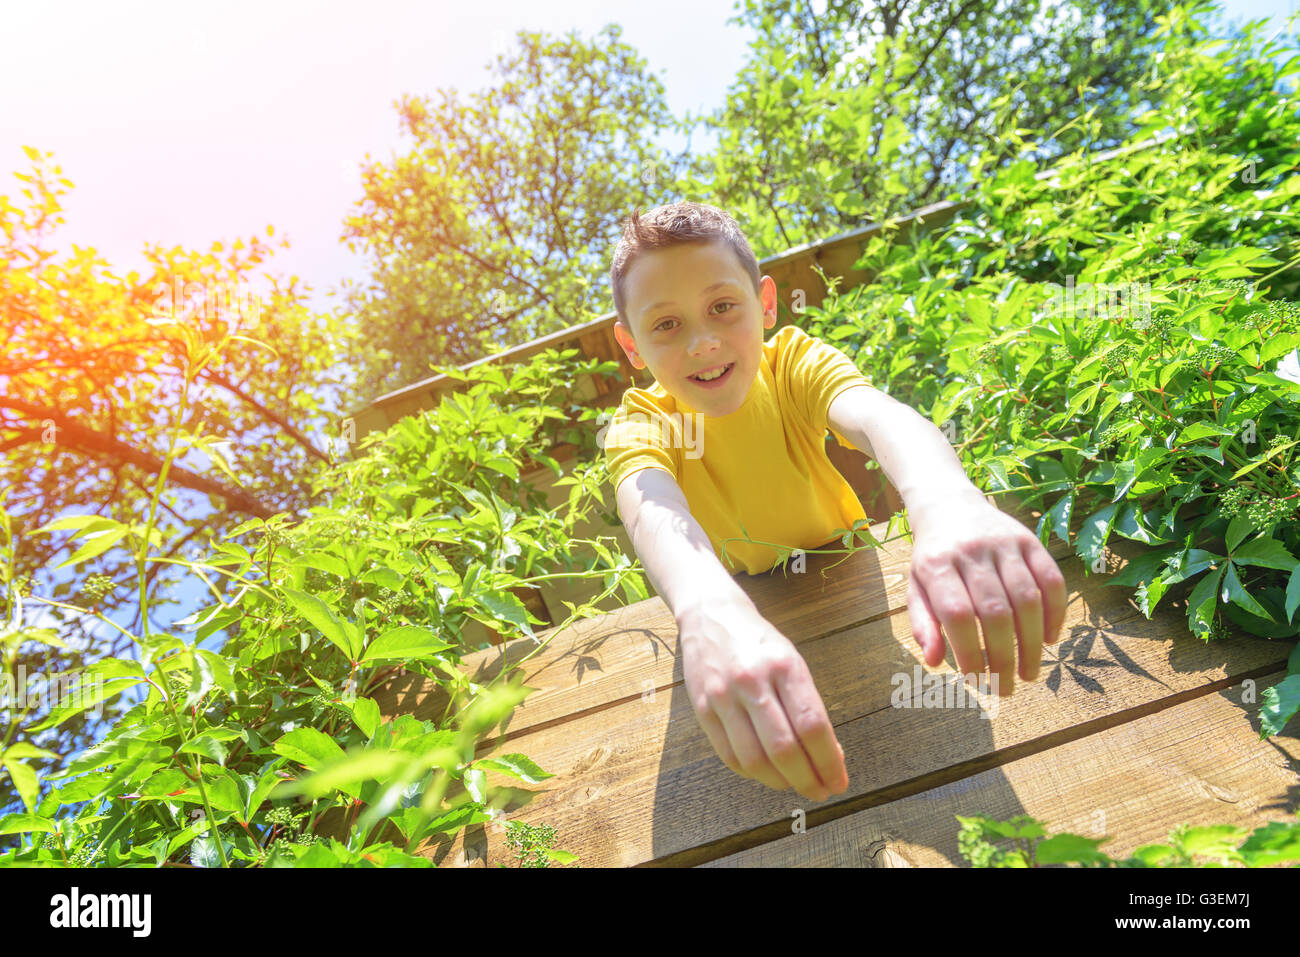 Smiling boy on treehouse. Summer time! Stock Photo